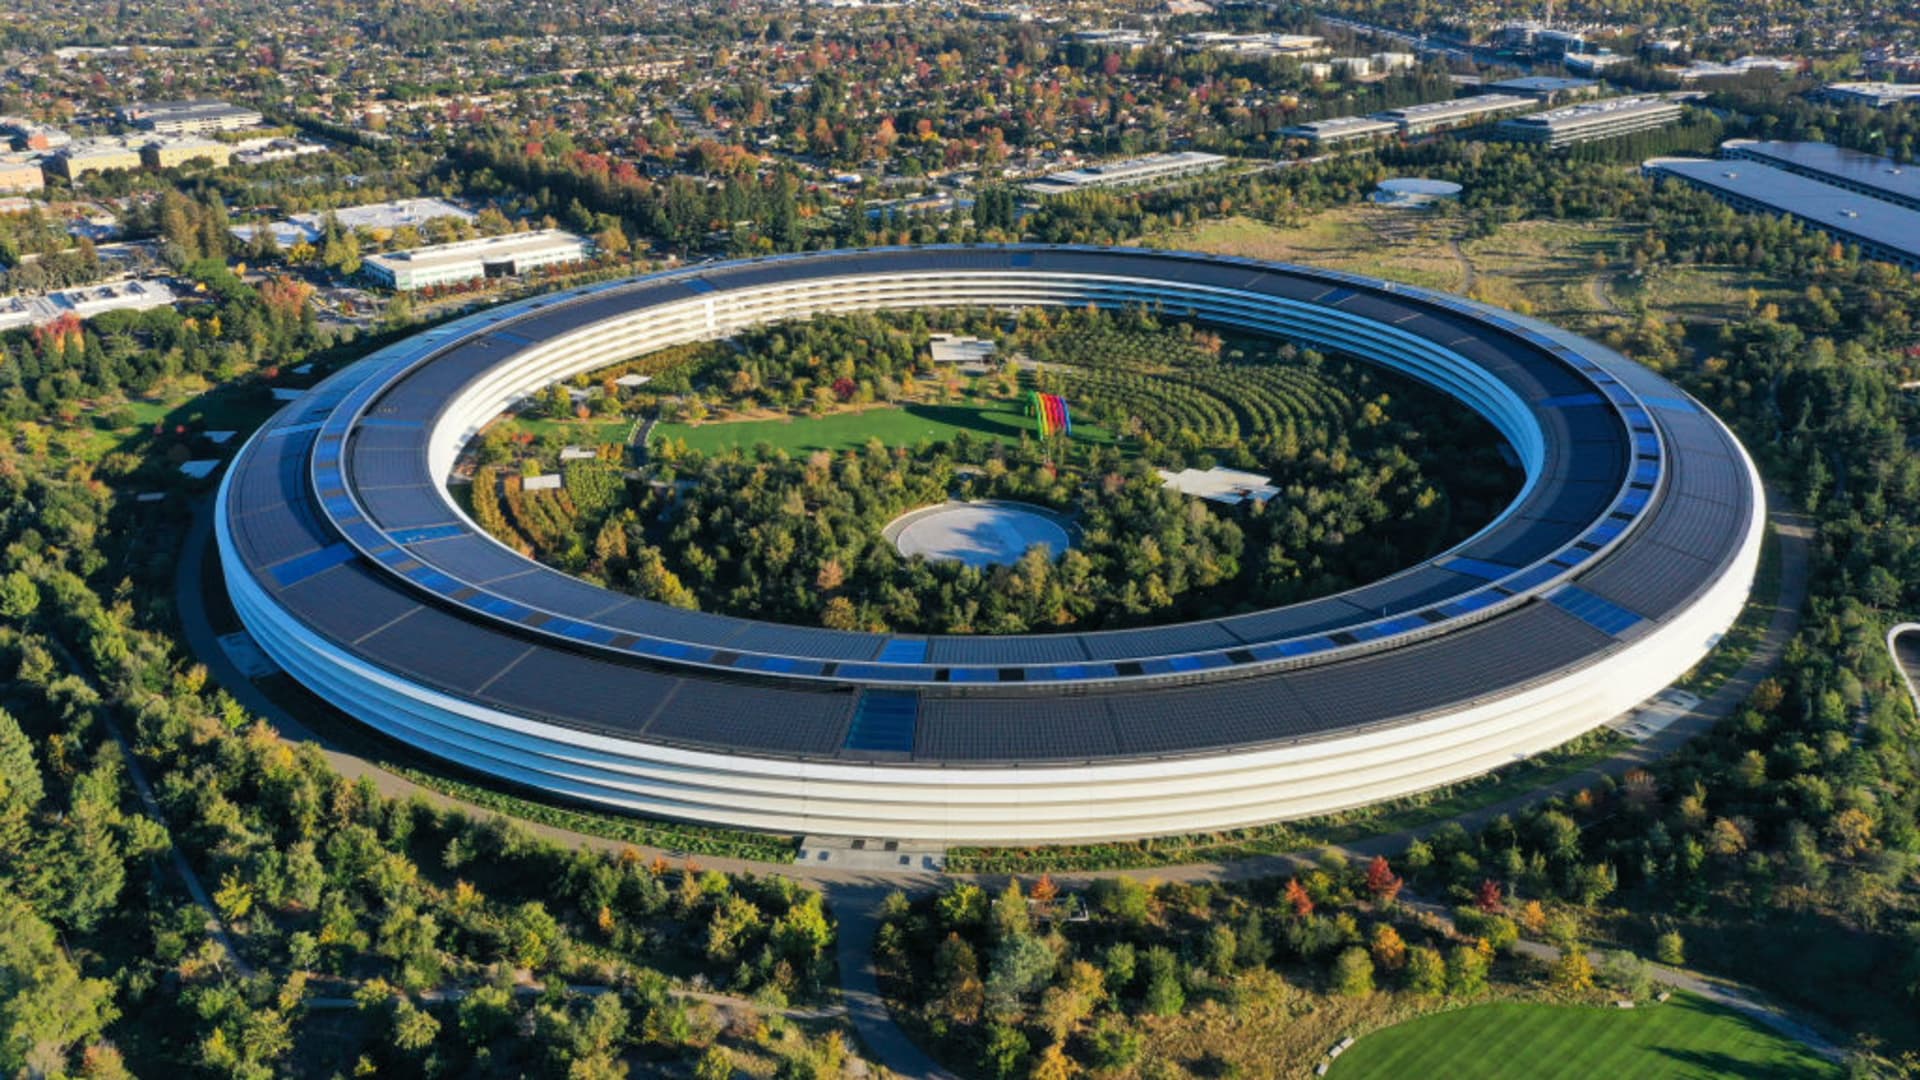 Apple tells employees to work at the office three times per week starting in Sep..